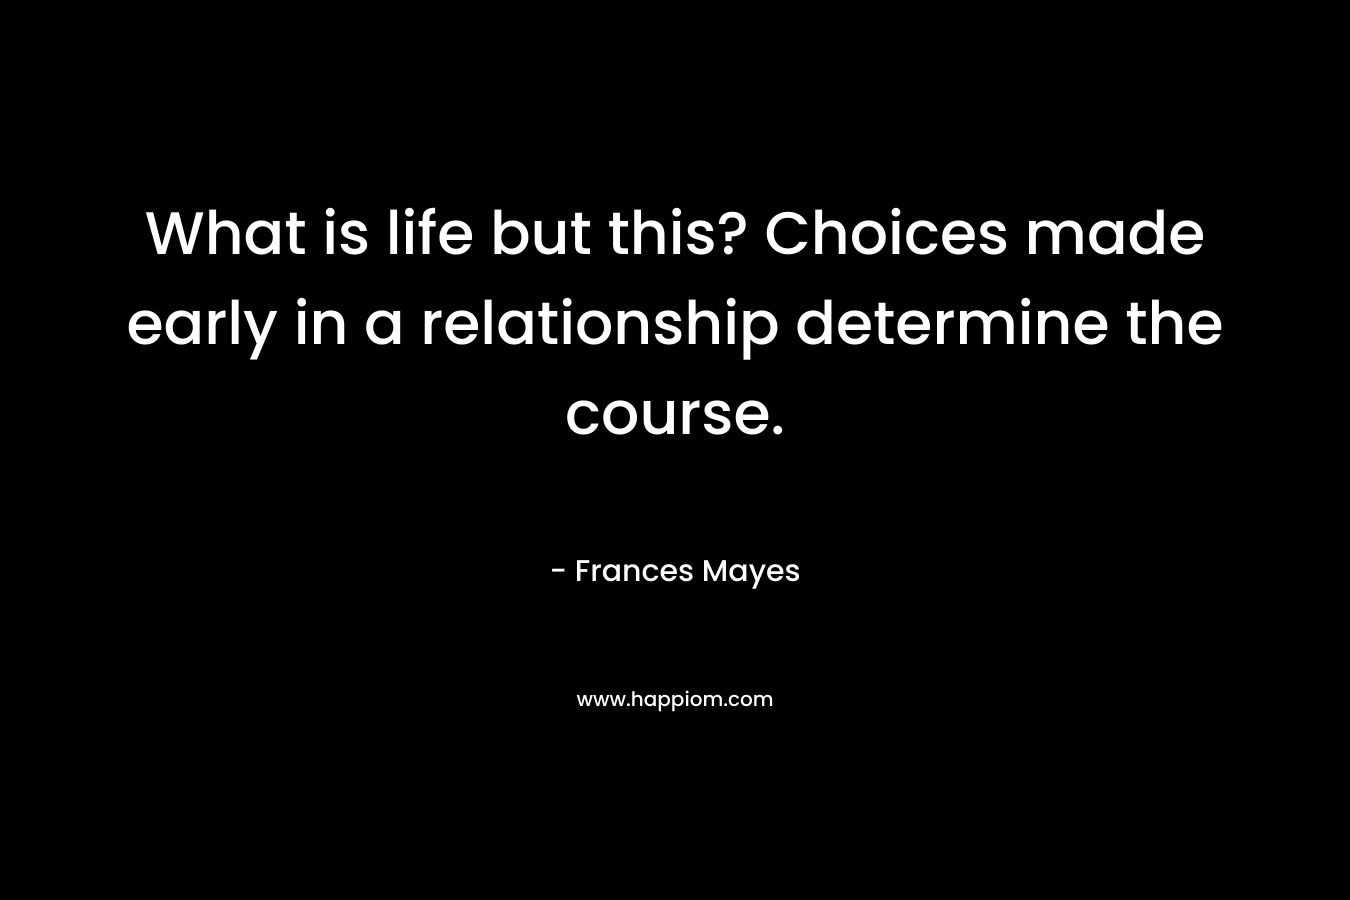 What is life but this? Choices made early in a relationship determine the course.